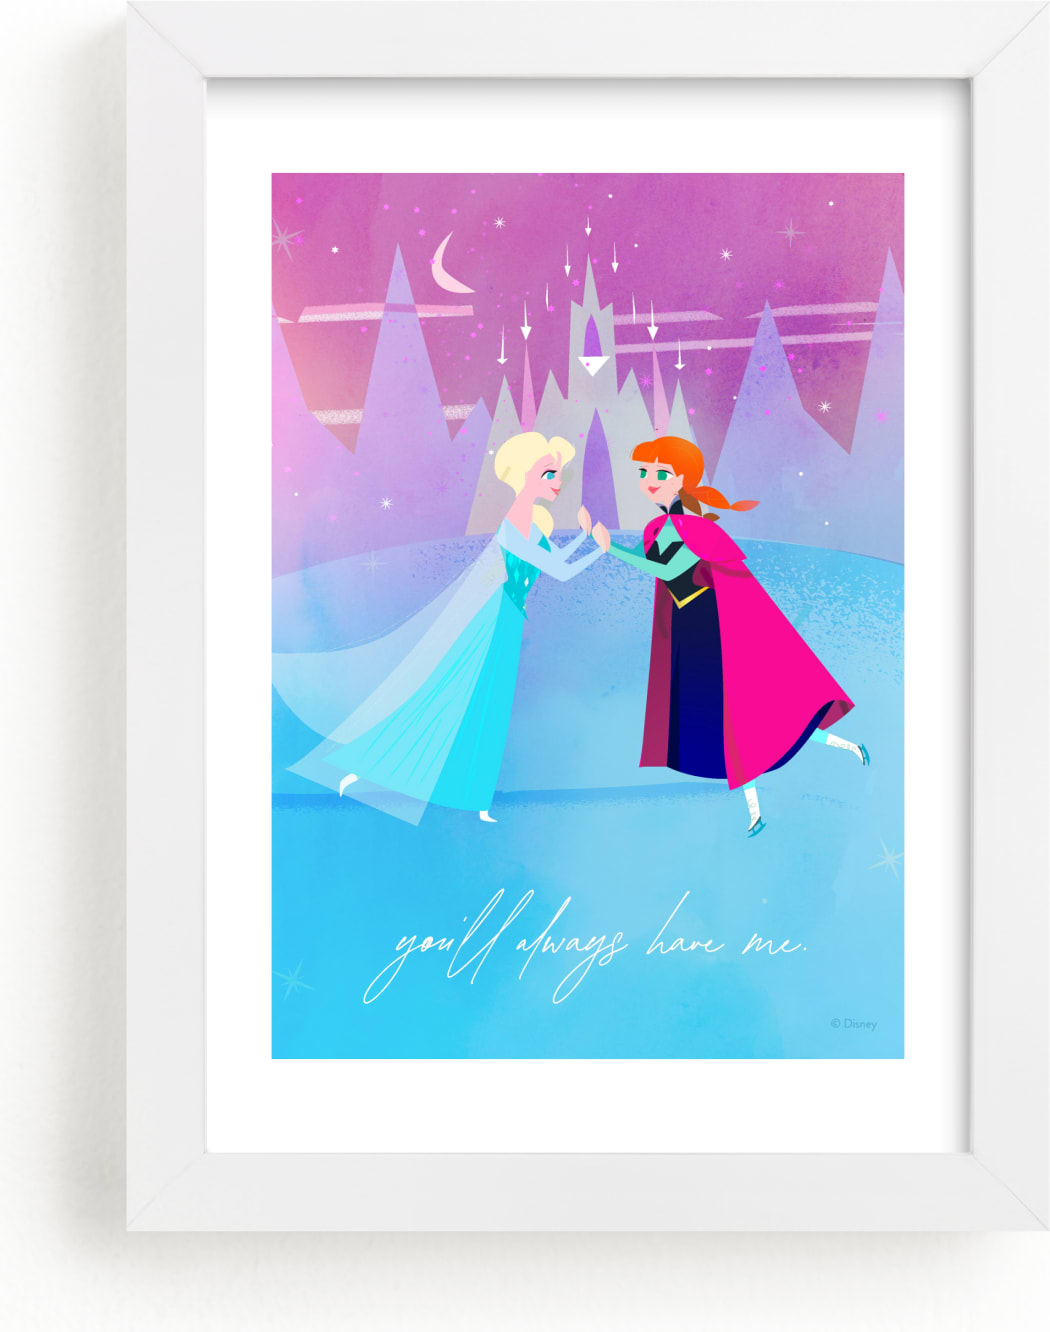 This is a blue disney art by Lori Wemple called Elsa and Anna from Disney's Frozen.